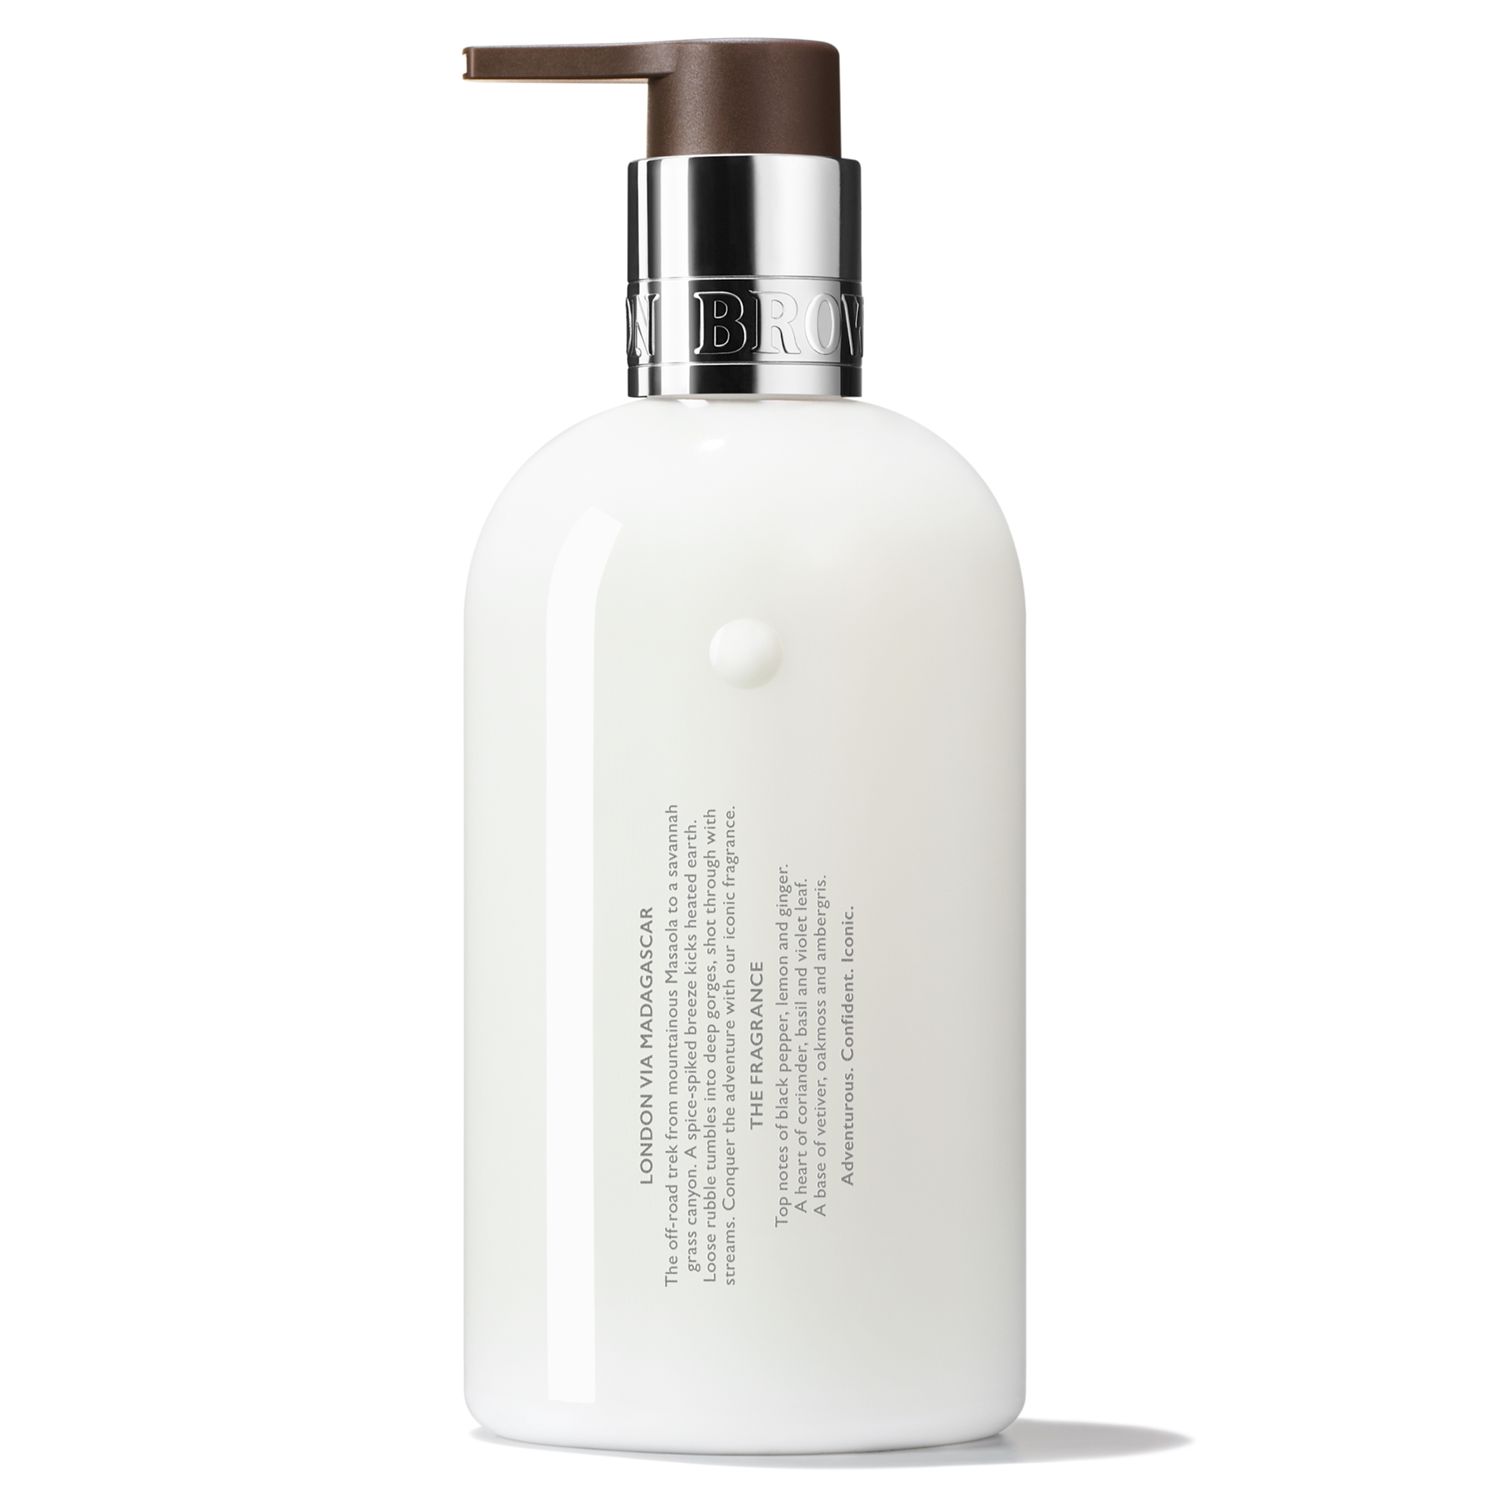 Molton Brown Re-Charge Black Pepper Body Lotion, 300ml